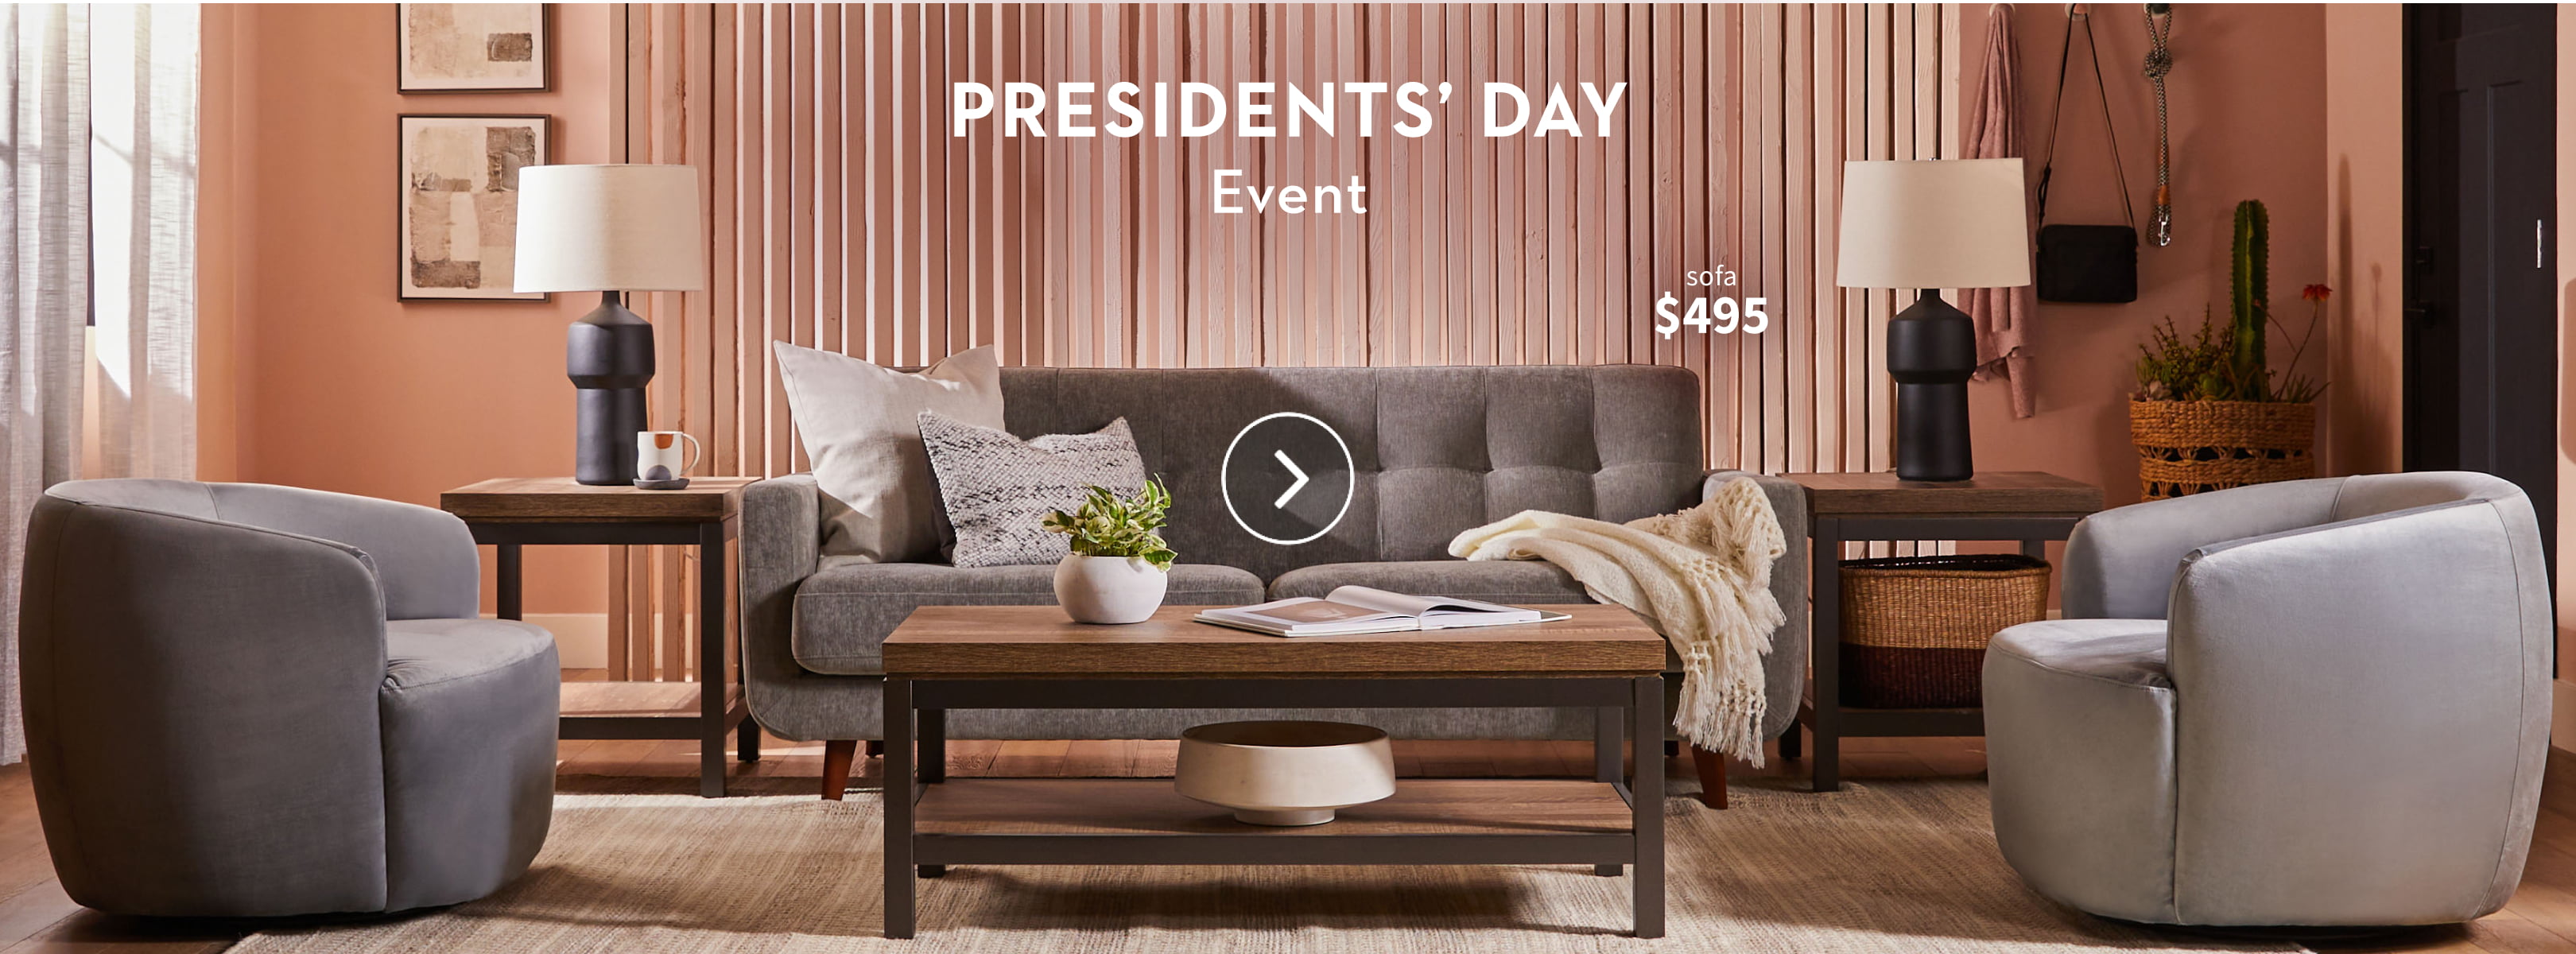 Presidents' Day Event banner